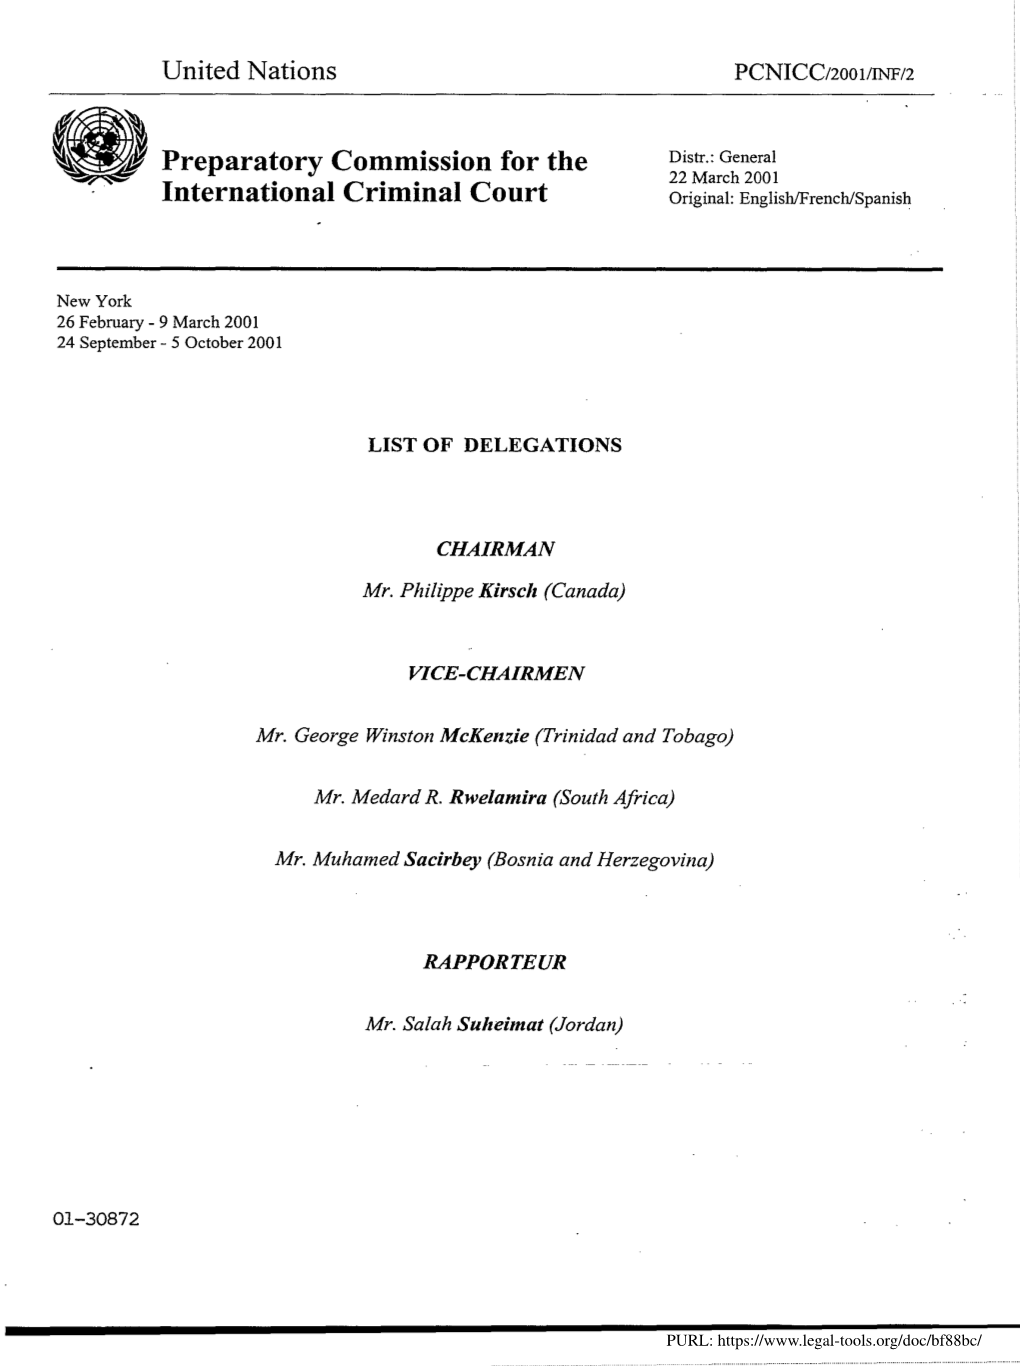 Preparatory Commission for the International Criminal Court